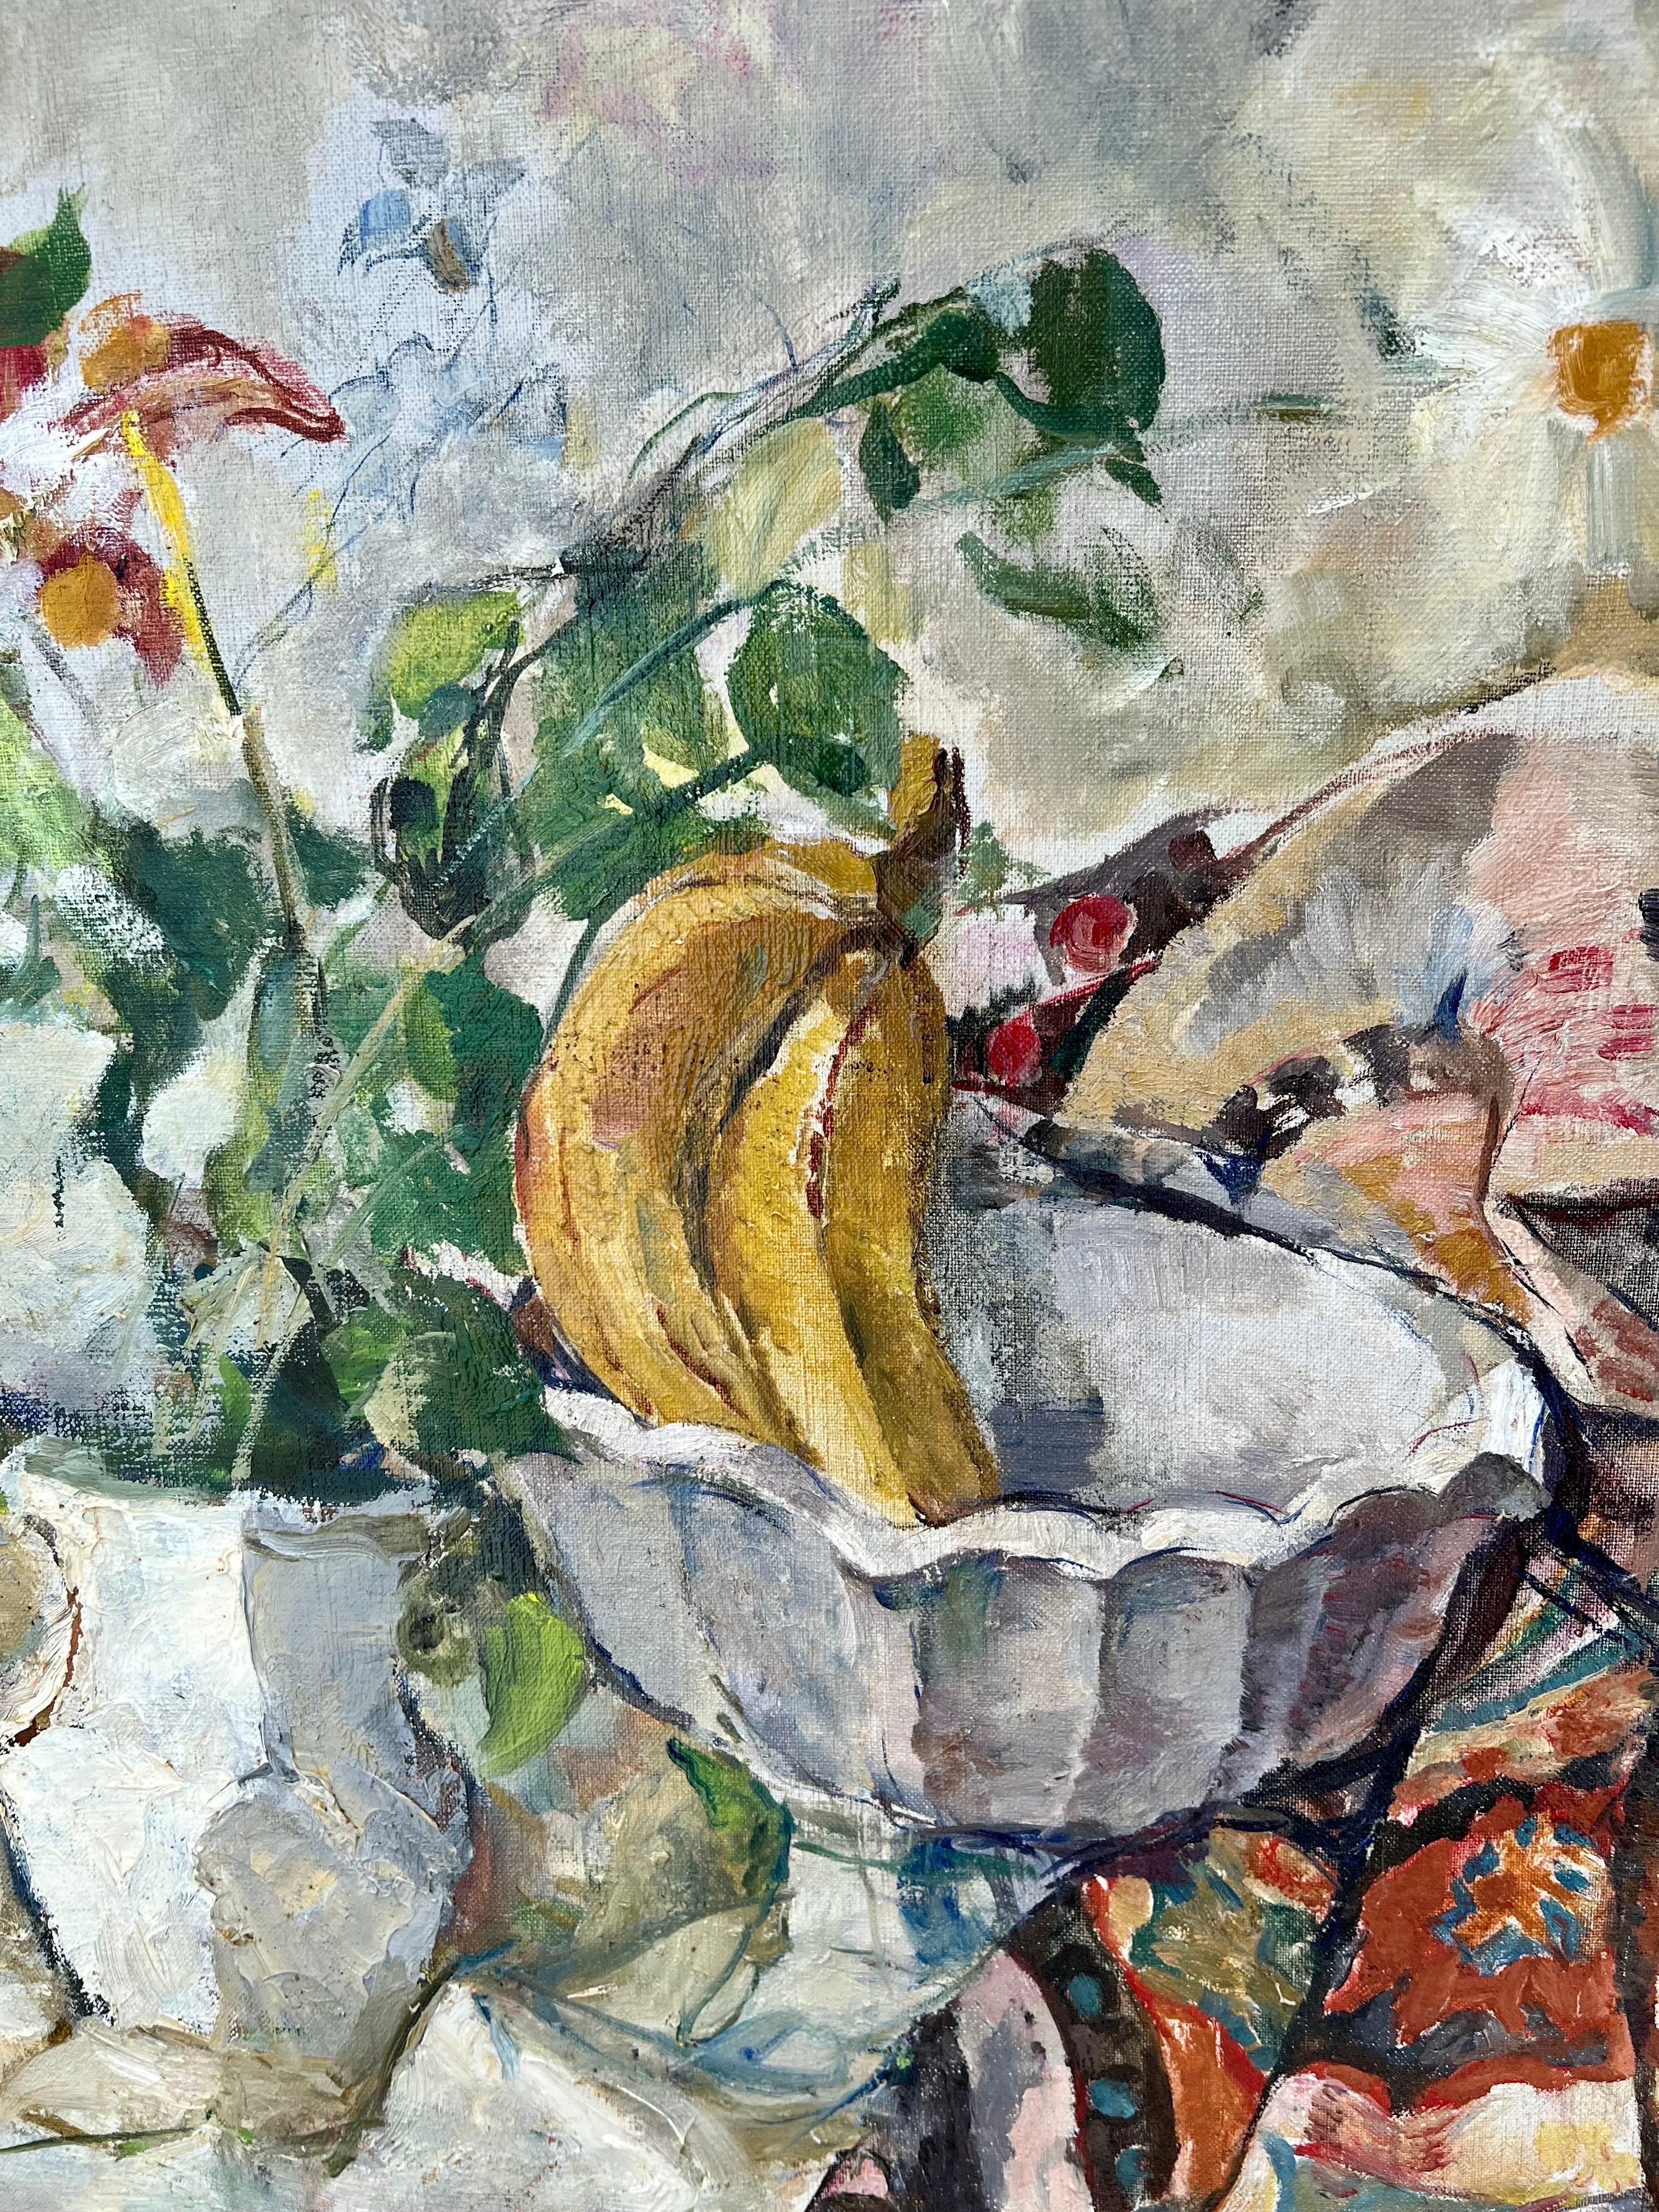 William Meyerowitz (1887 - 1981) 
Oil painting on canvas 
Depicting a  still life scene with fruit bowl, bananas,  flowers and quilt. Post Impressionist oil painting.
Hand signed lower right.  Bears signature but no date.
Dimensions: 24